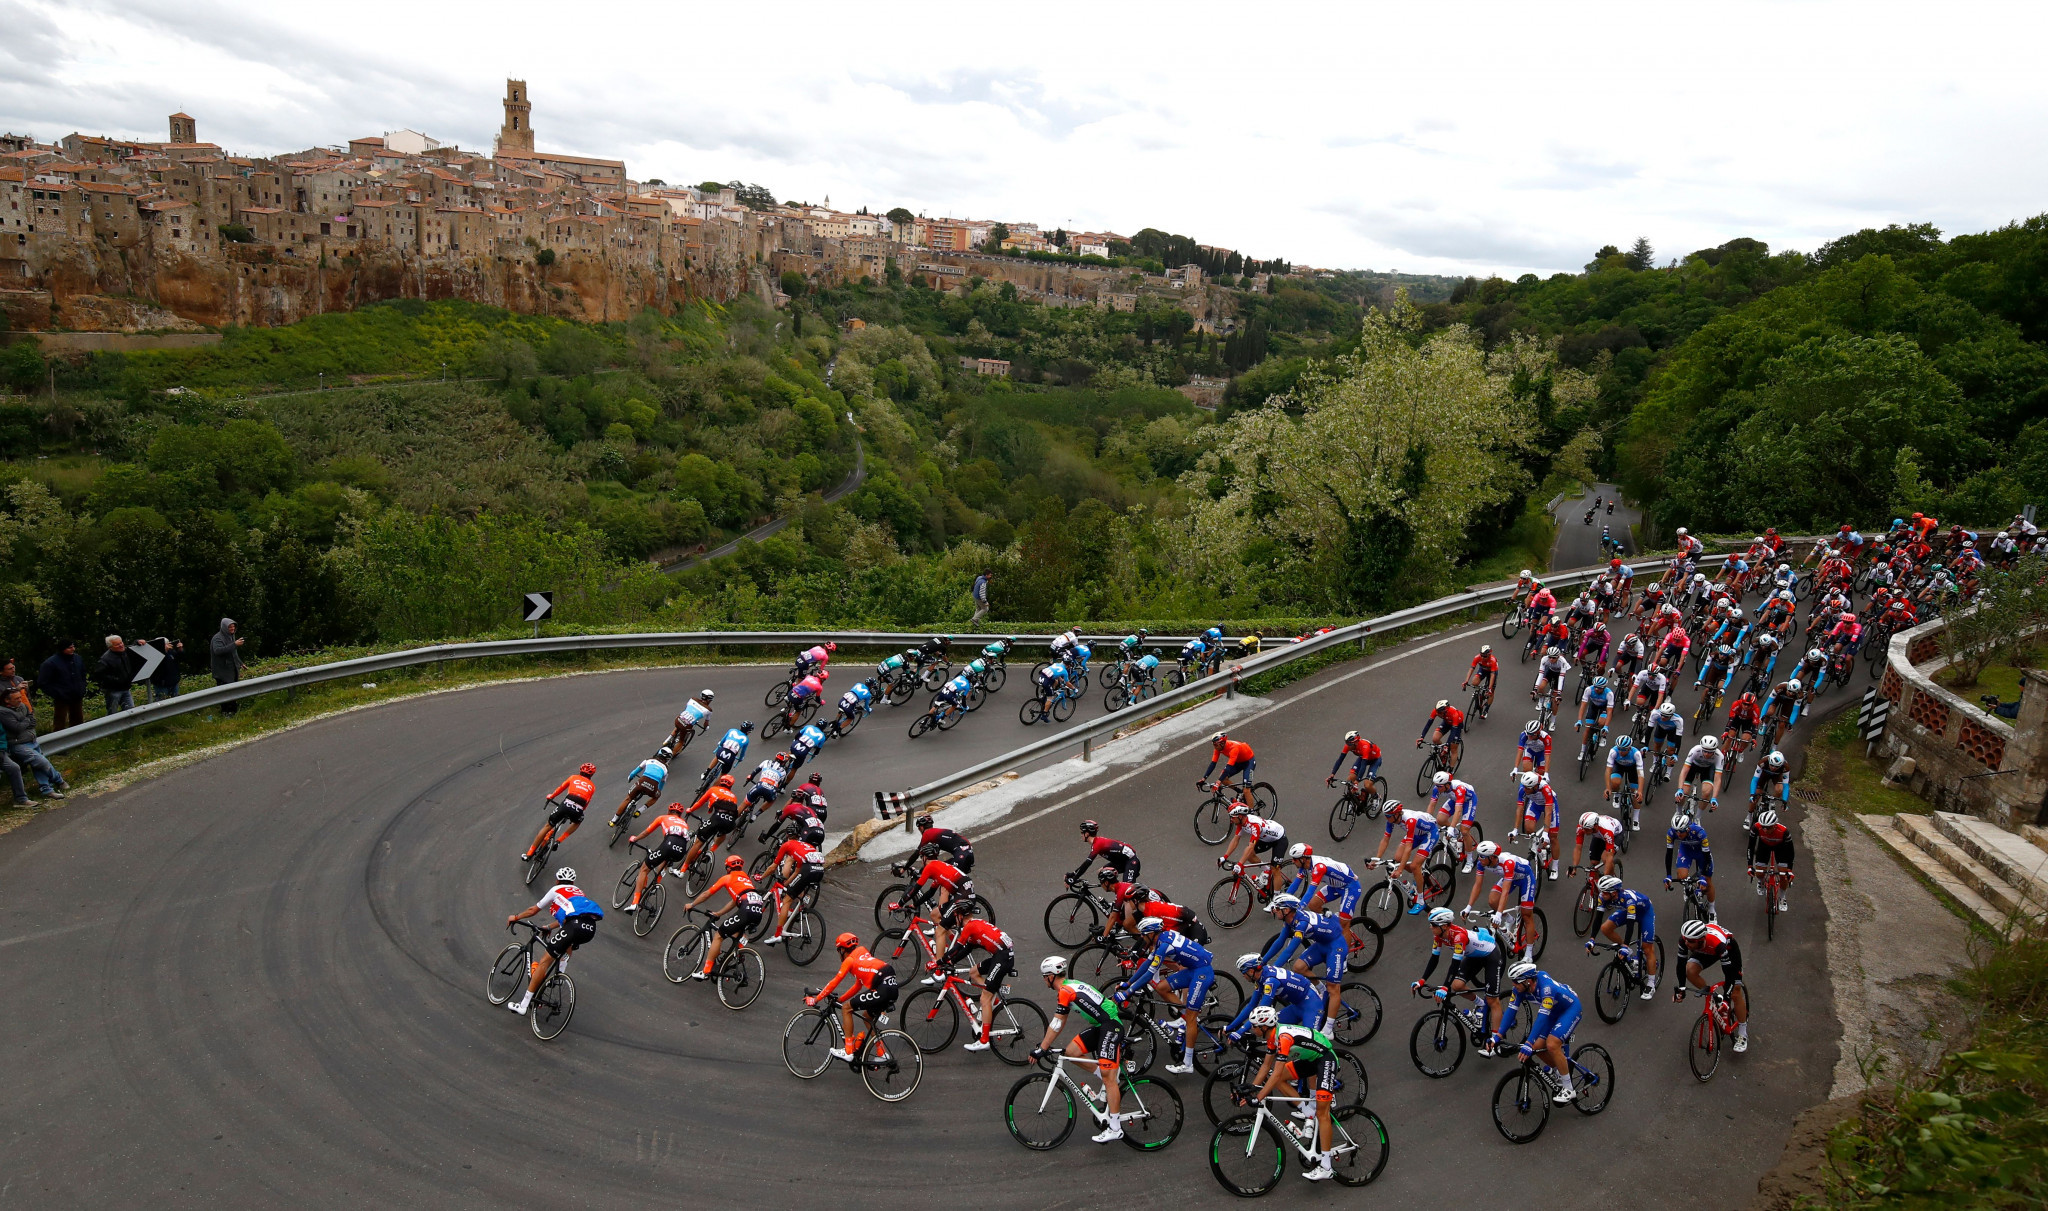 The Italian regions of Tuscany and Emilia-Romagna have launched a joint bid to host the Tour de France Grand Depart ©Getty Images